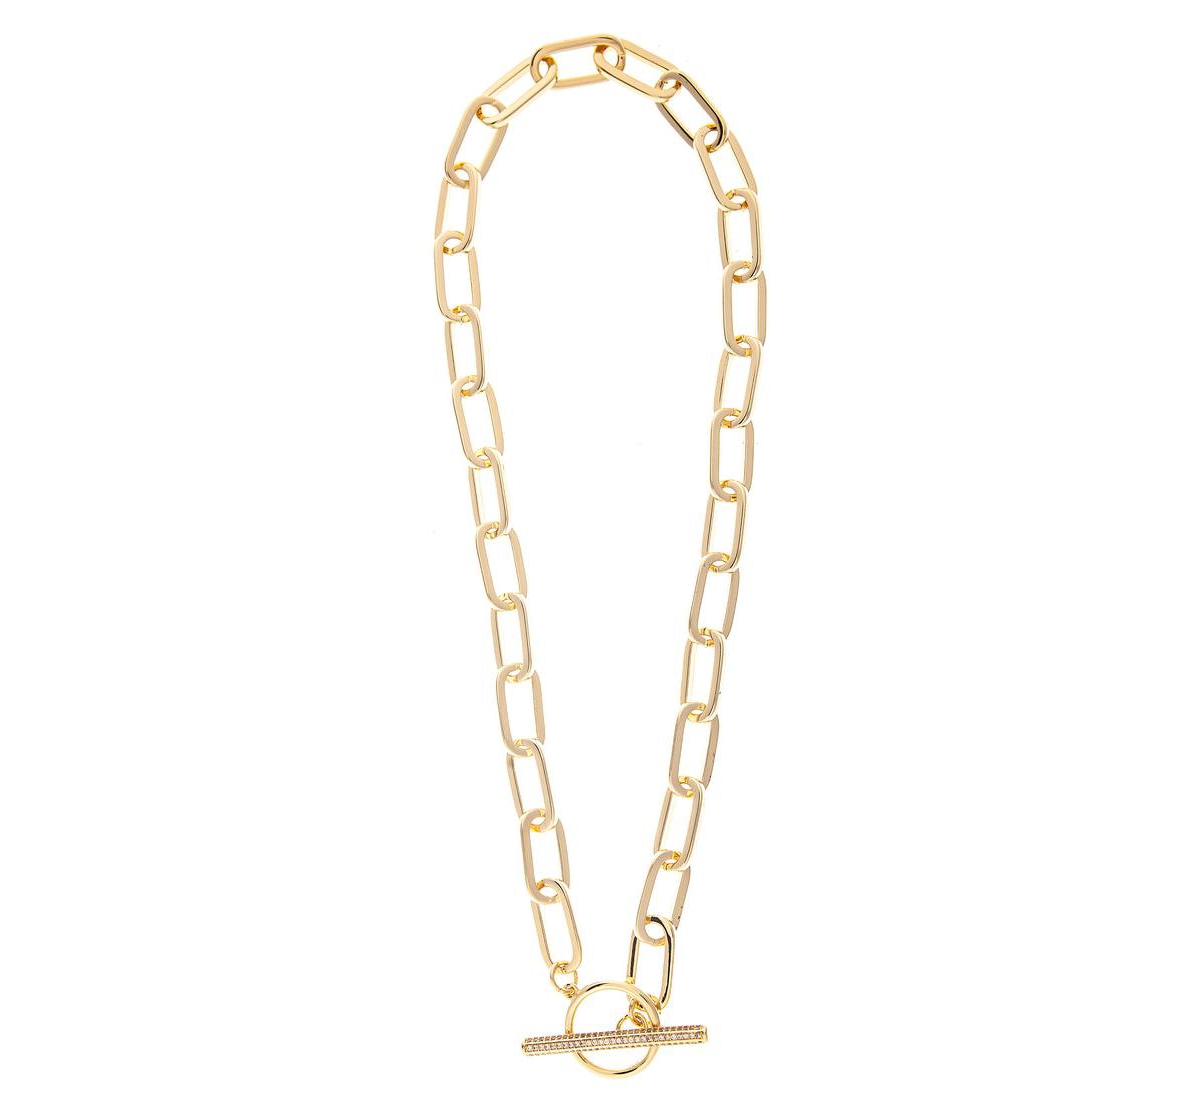 Paper Clip Chain + Cubic Zirconia Toggle Necklace - Gold with cubic zirconia